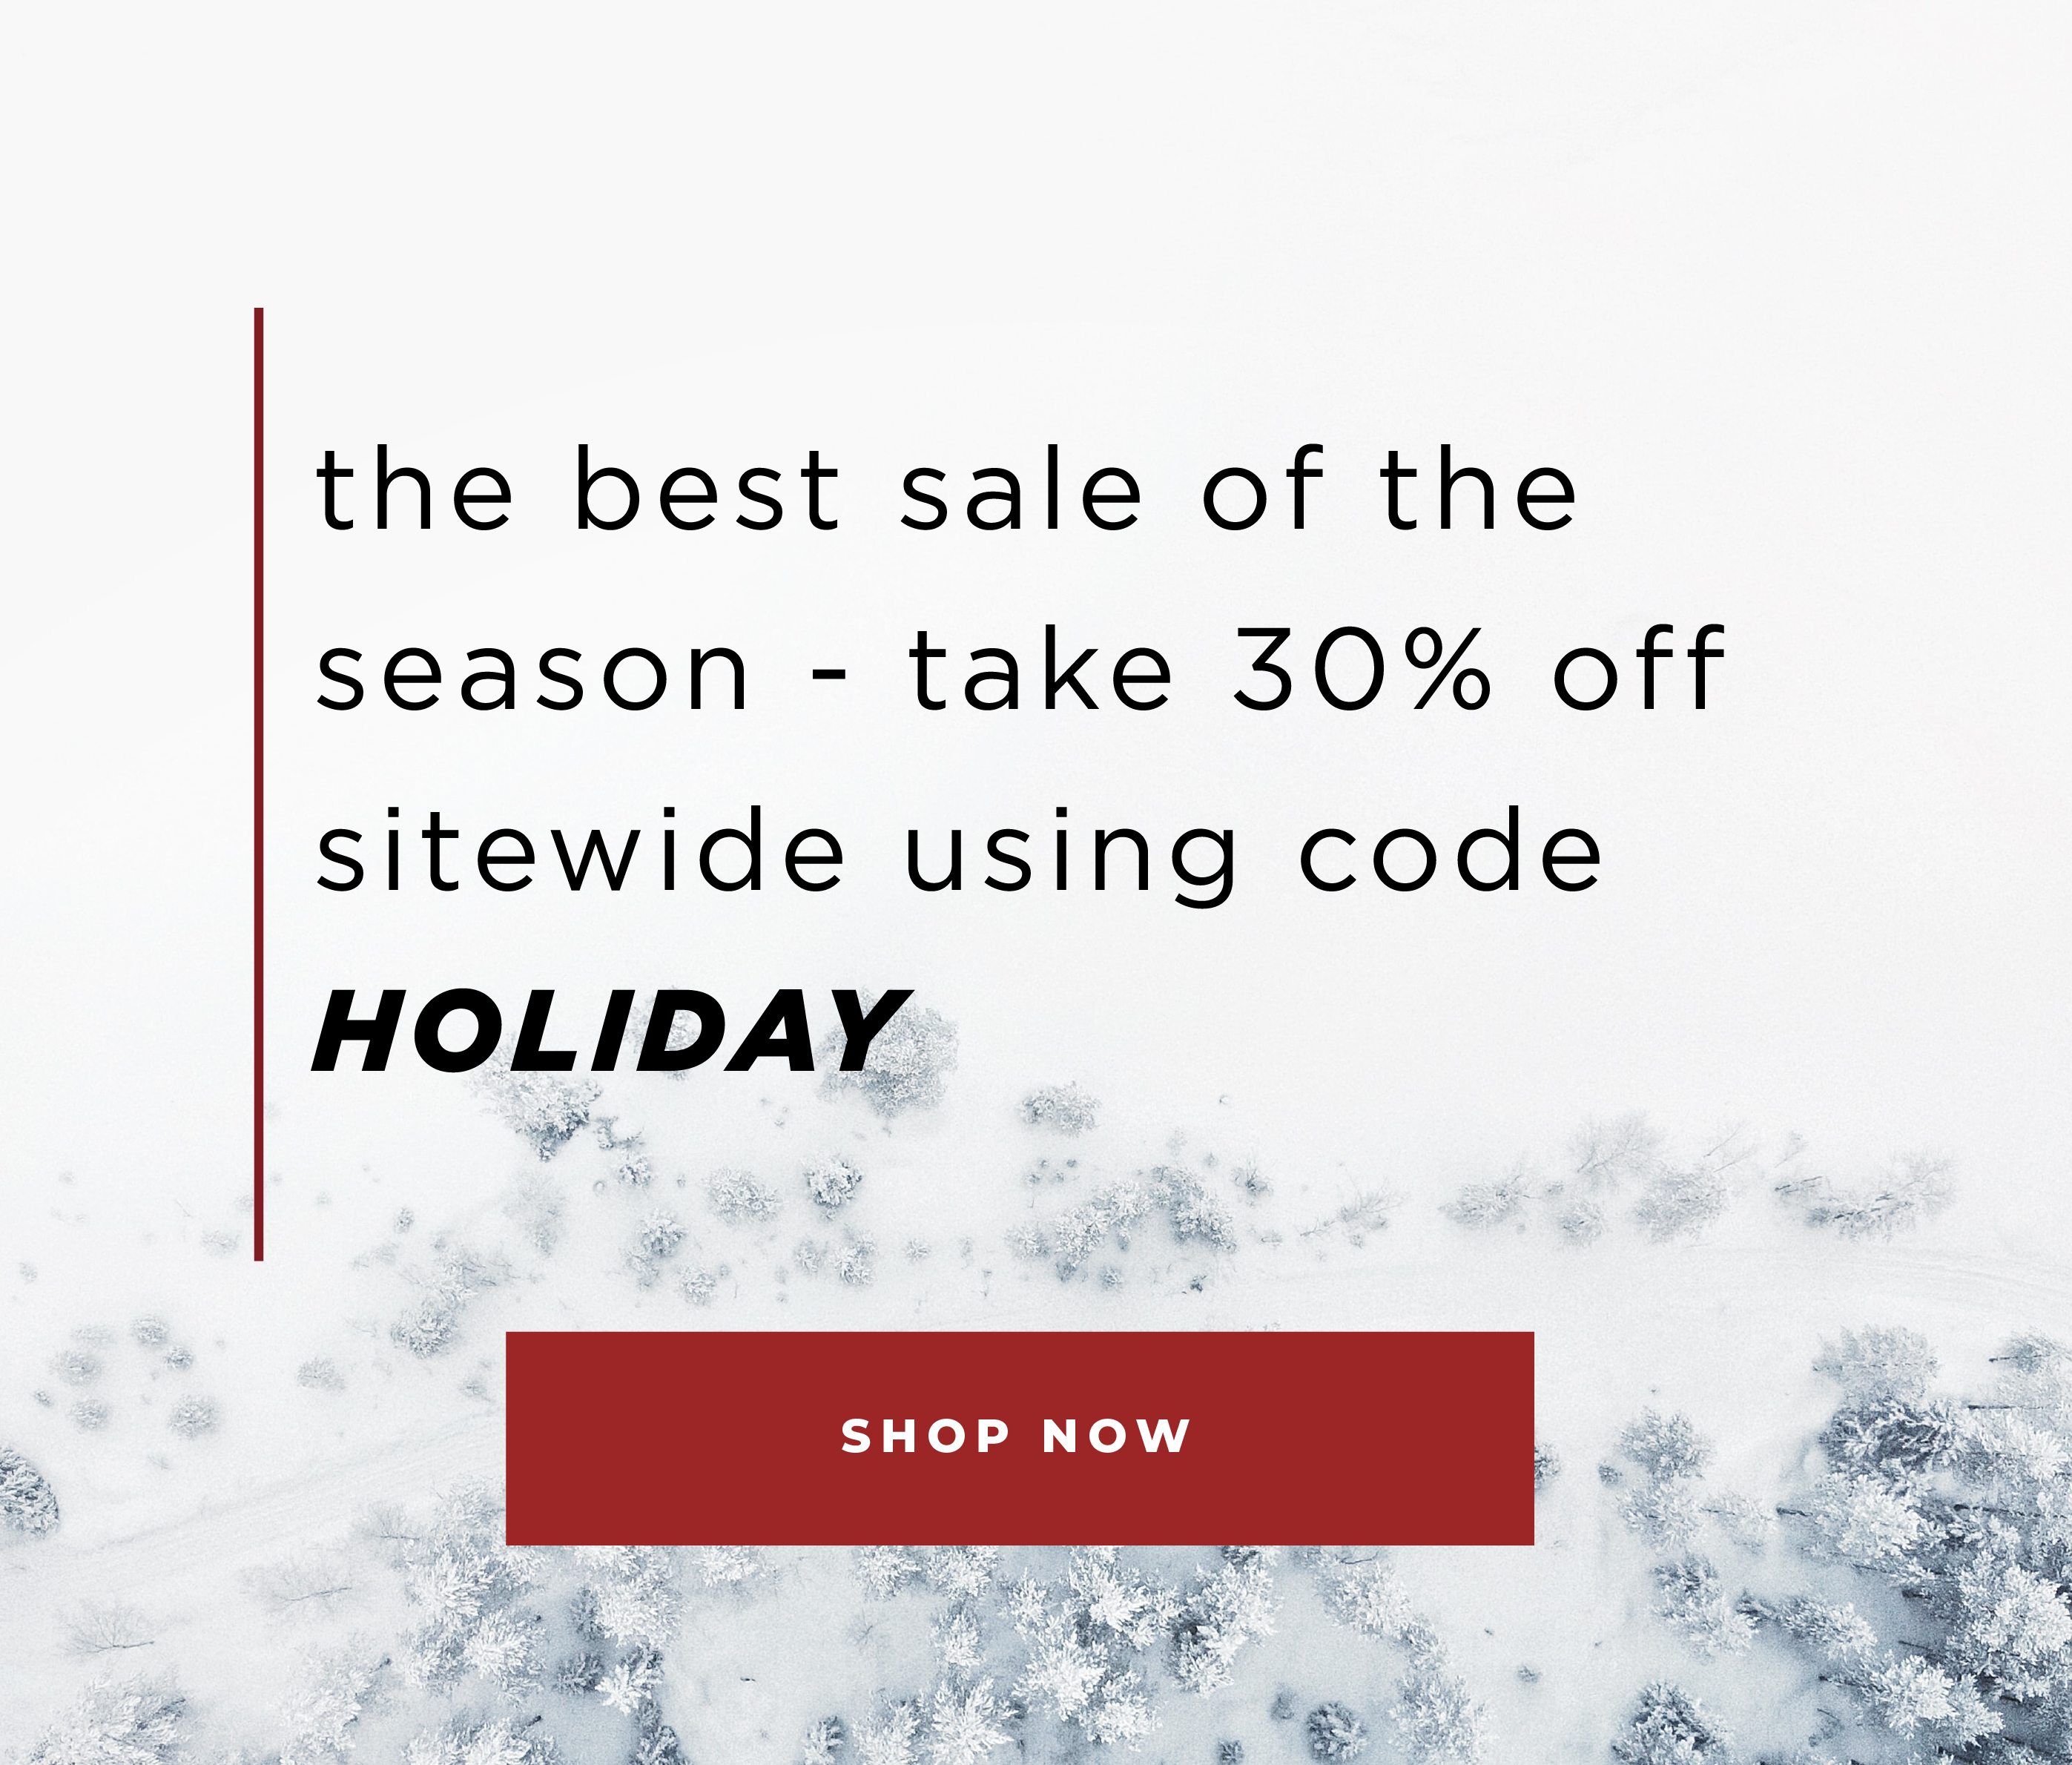 the best sale of the season - take 30% off site wide using code HOLIDAY